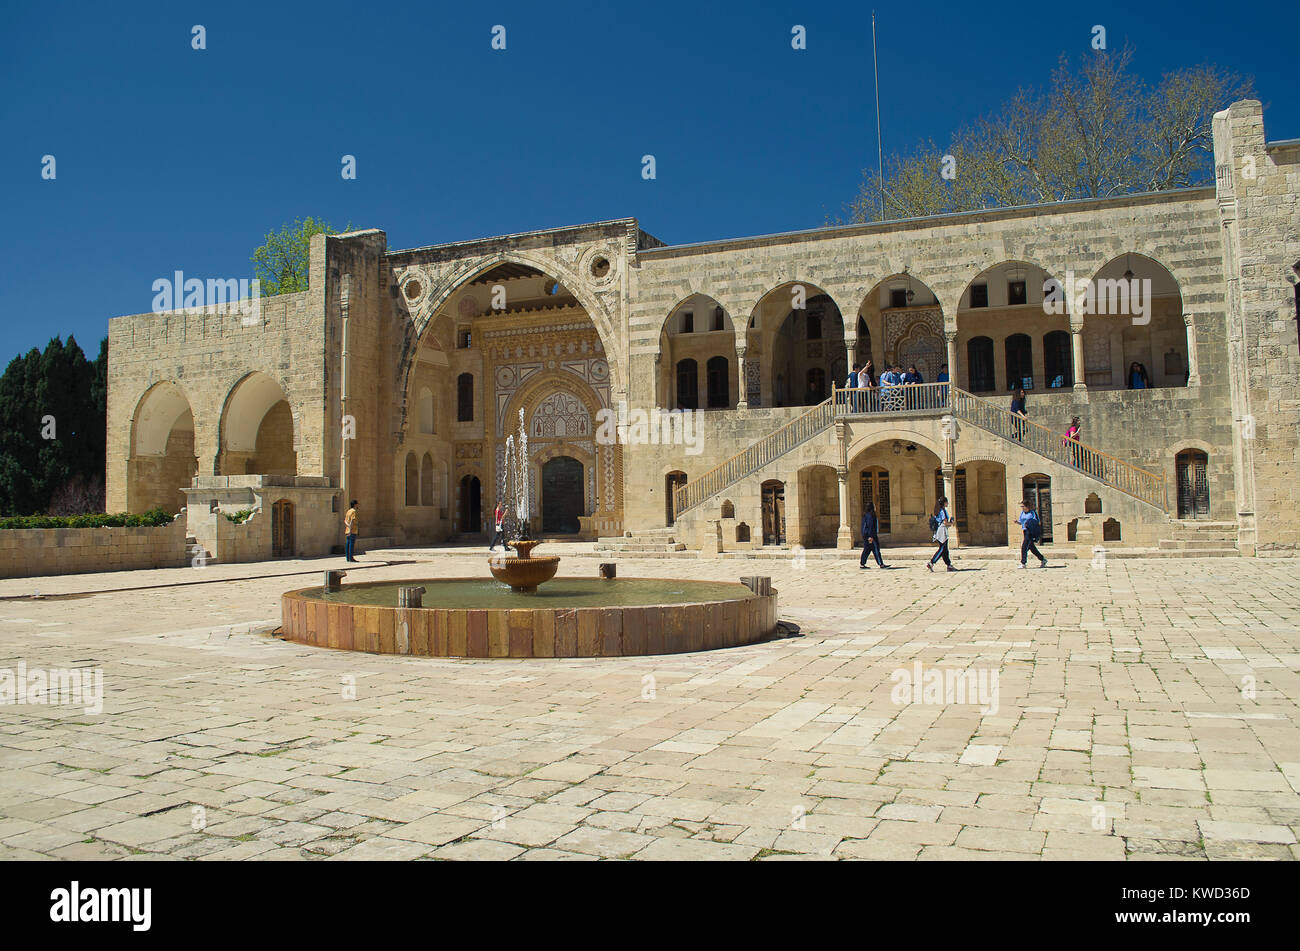 Chouf District, Lebanon, April 05 - 2017: Historic palace located inside the Beit ed-Dine (Beiteddine) palace, built in 1788, renovated after the civi Stock Photo